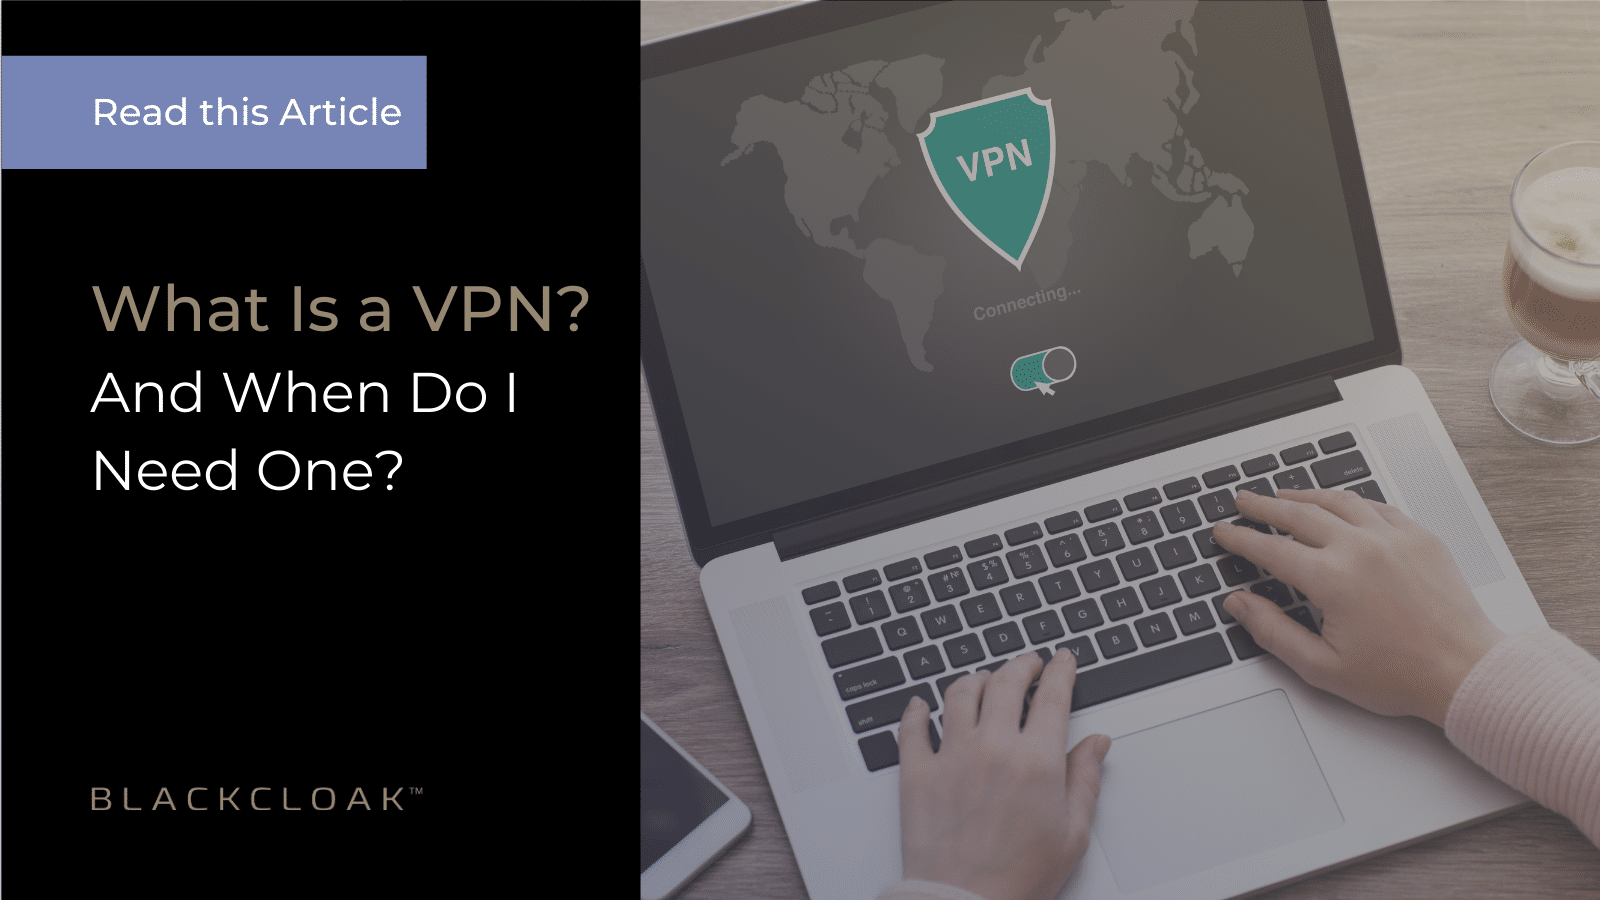 What Is a VPN and When Do I Need One?